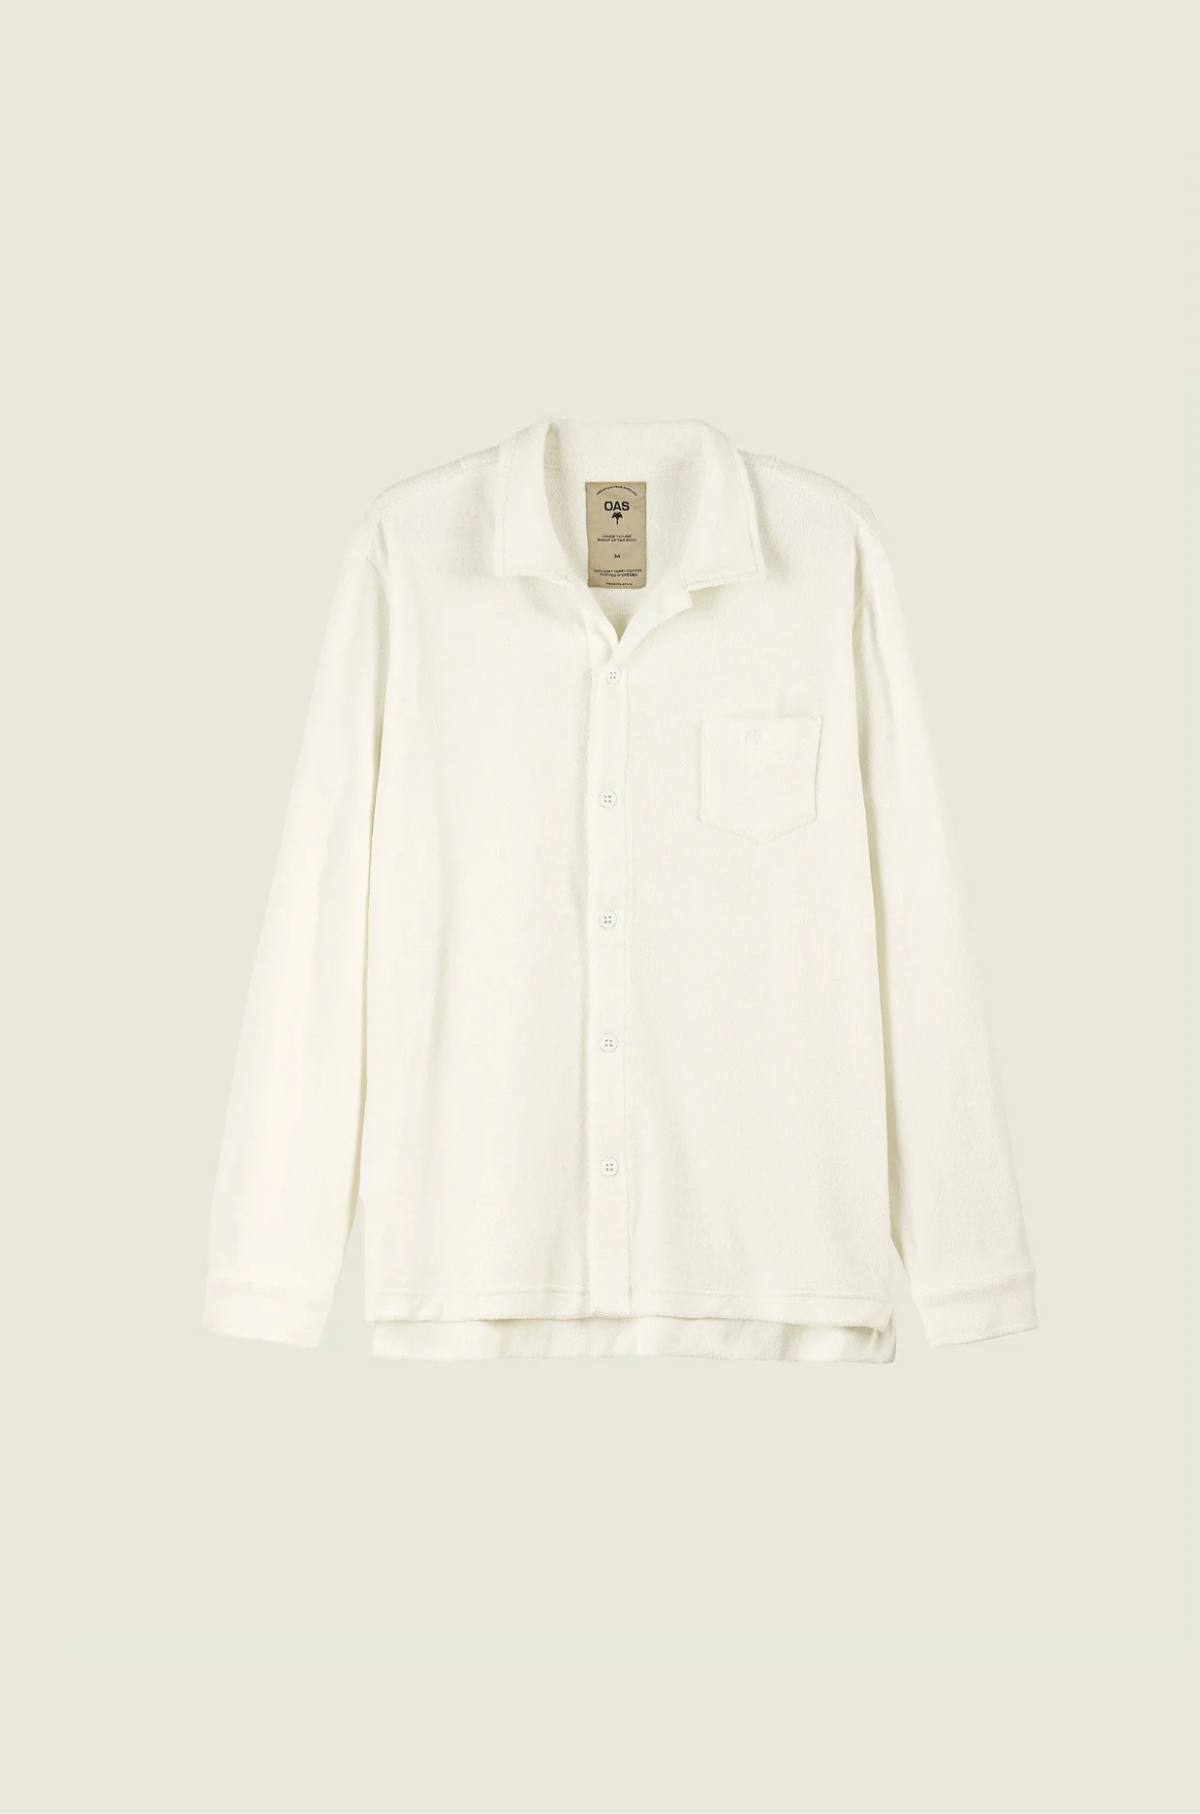 OAS - White Camisa Frottee Shirt